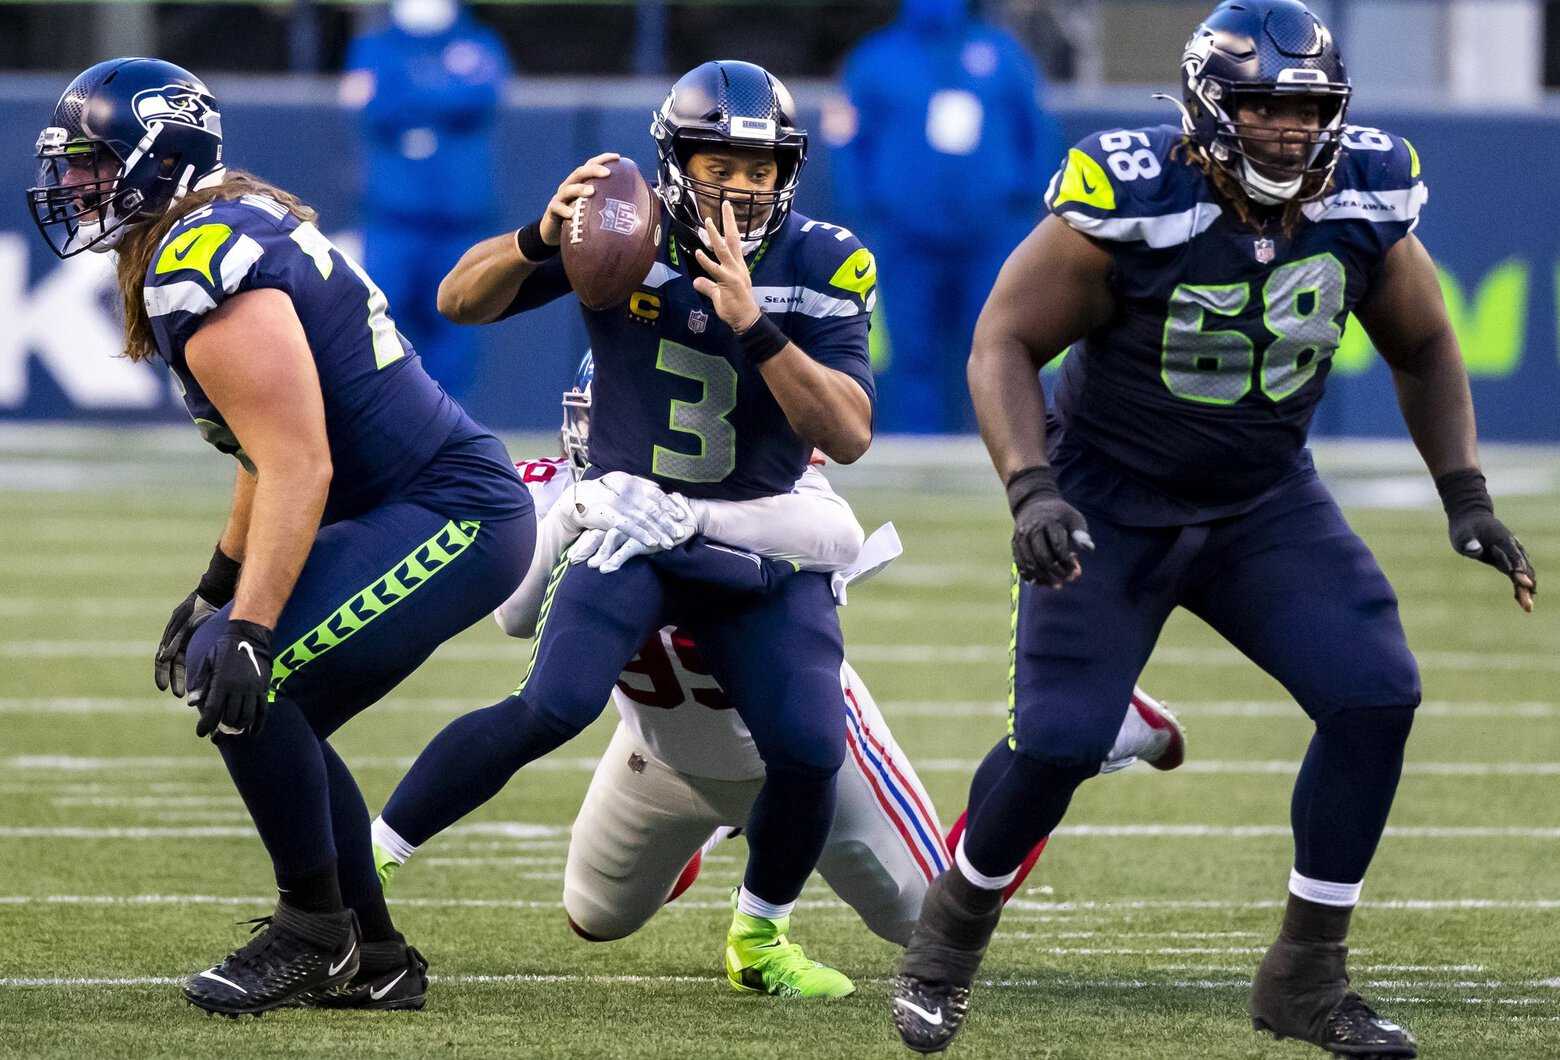  How Many Seahawks Does It Take To Beat A Wounded Giant?